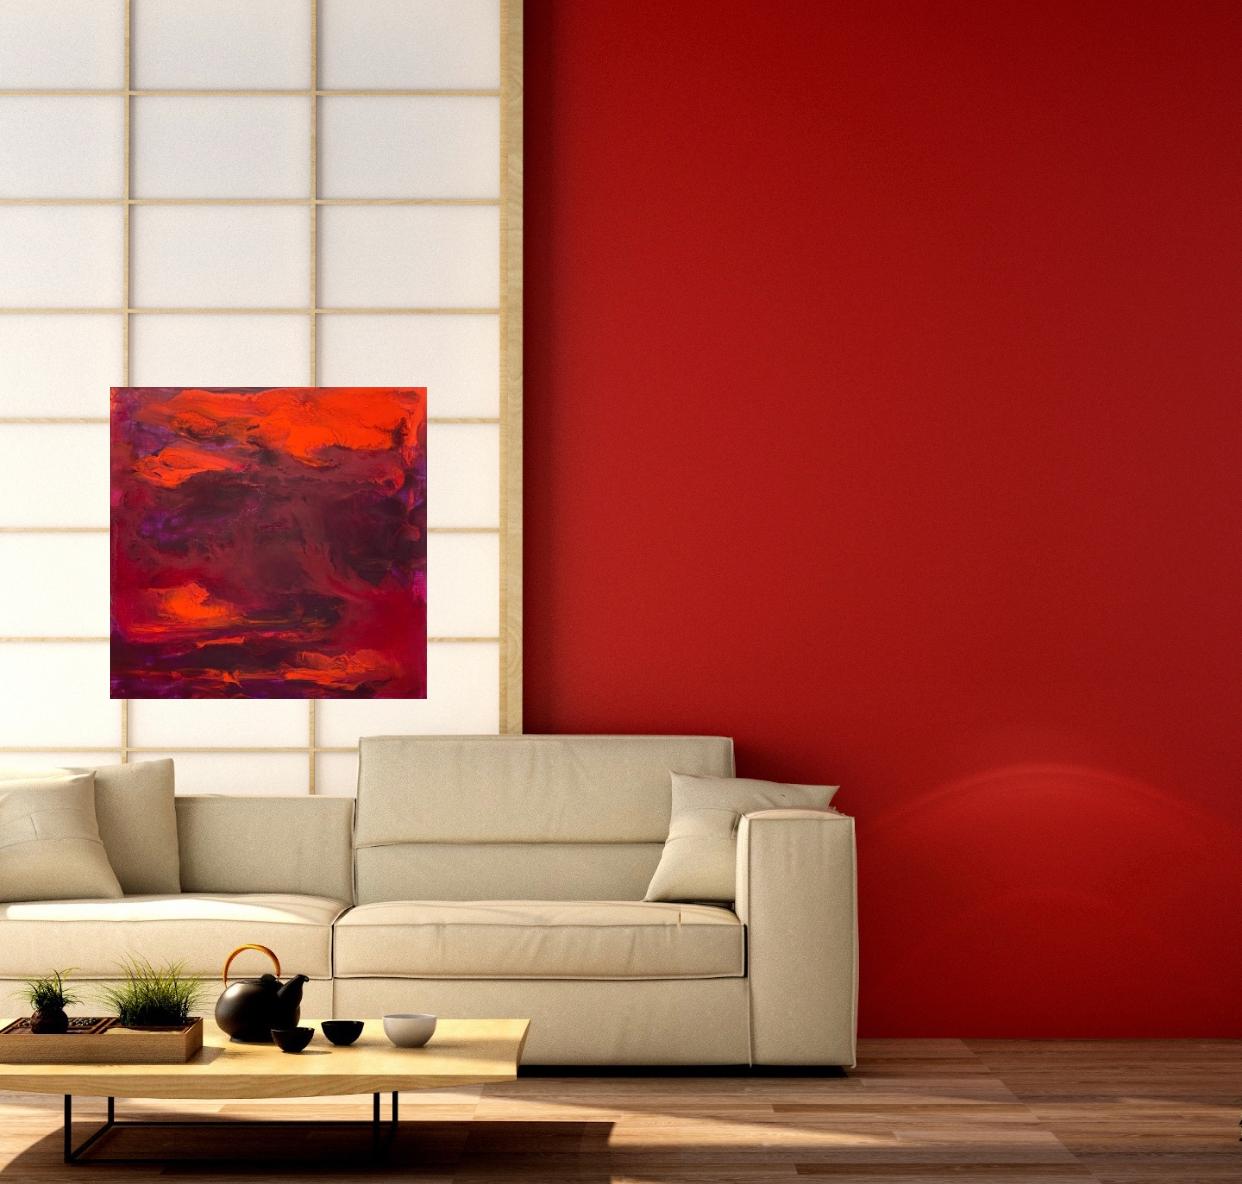 Sailor's delight, Contemporary painting with bold reds, oranges and violets 10